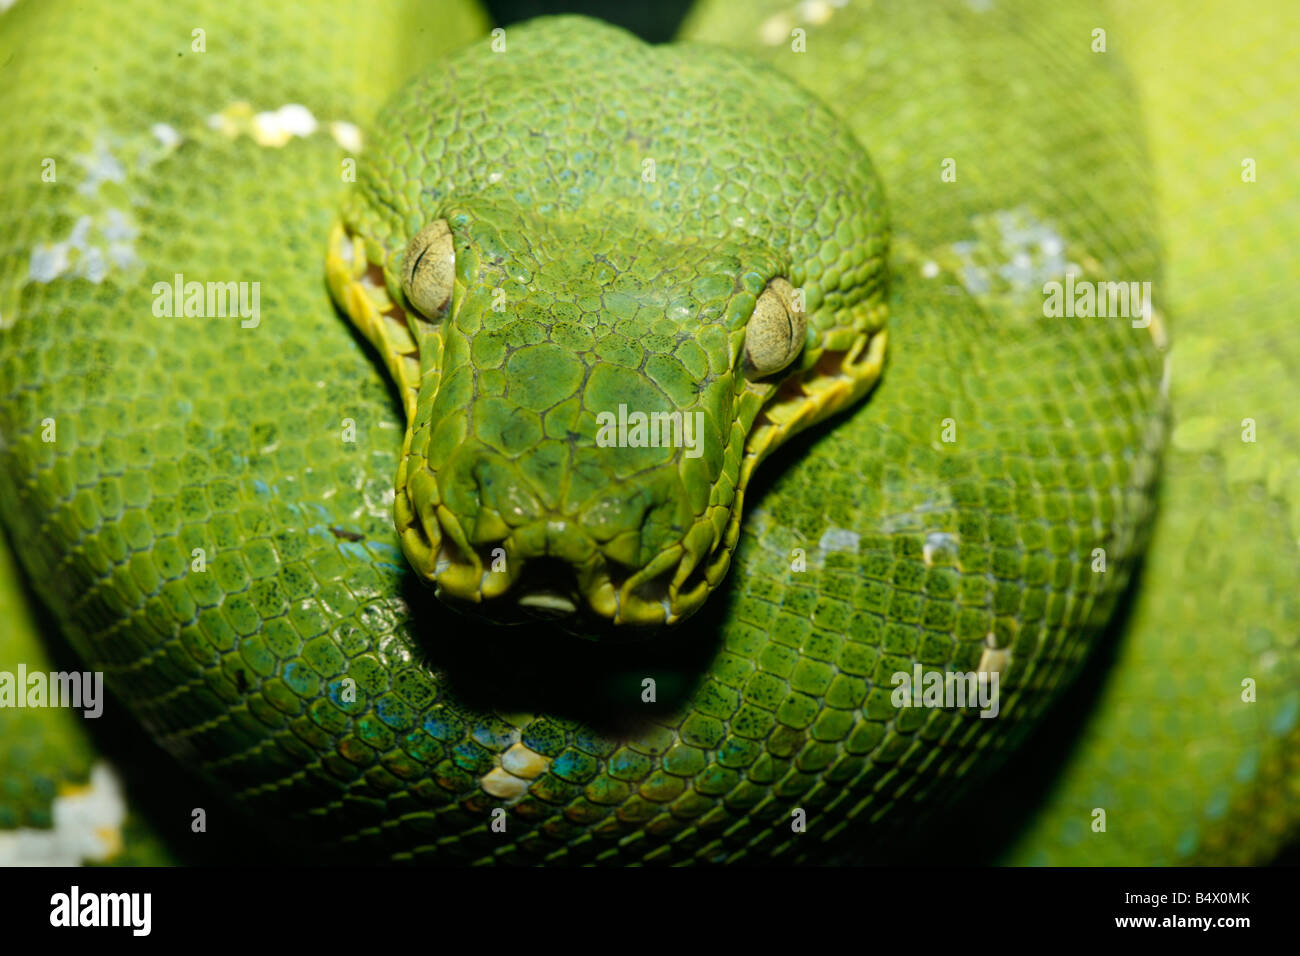 Close up photo of an Emeral Tree Boa taken with macro lens could also be a Green Tree Python Scientific Name Corallus caninus Stock Photo